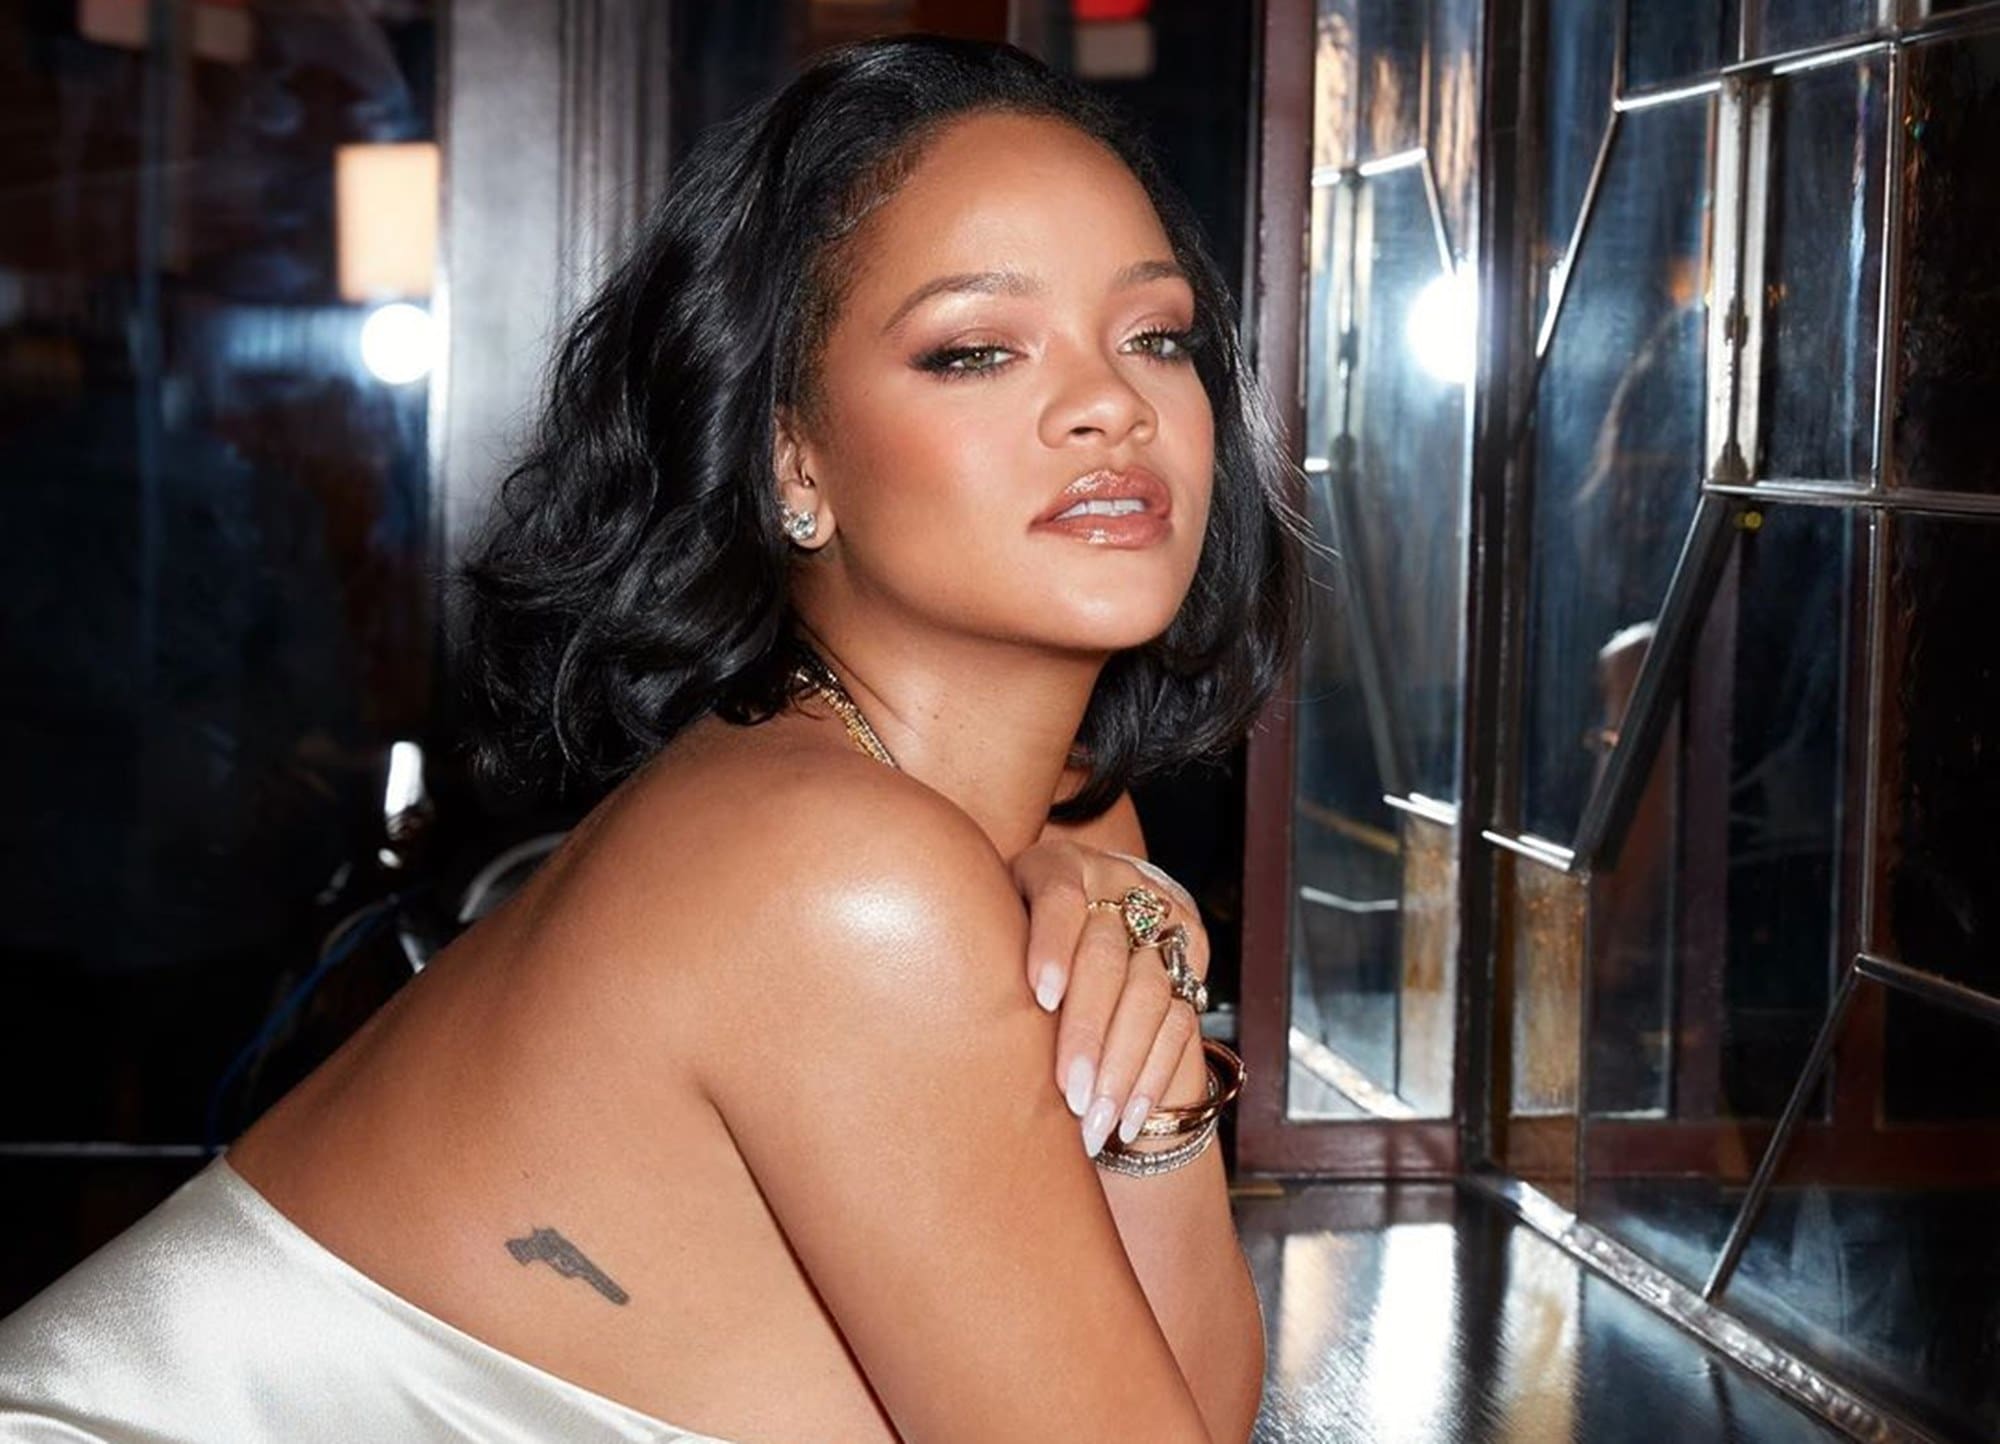 rihanna-breaks-the-internet-as-she-drops-her-clothes-in-new-savage-campaign-photo-zendaya-and-normani-could-not-resist-her-alluring-glow-will-ex-boyfriend-chris-brown-react